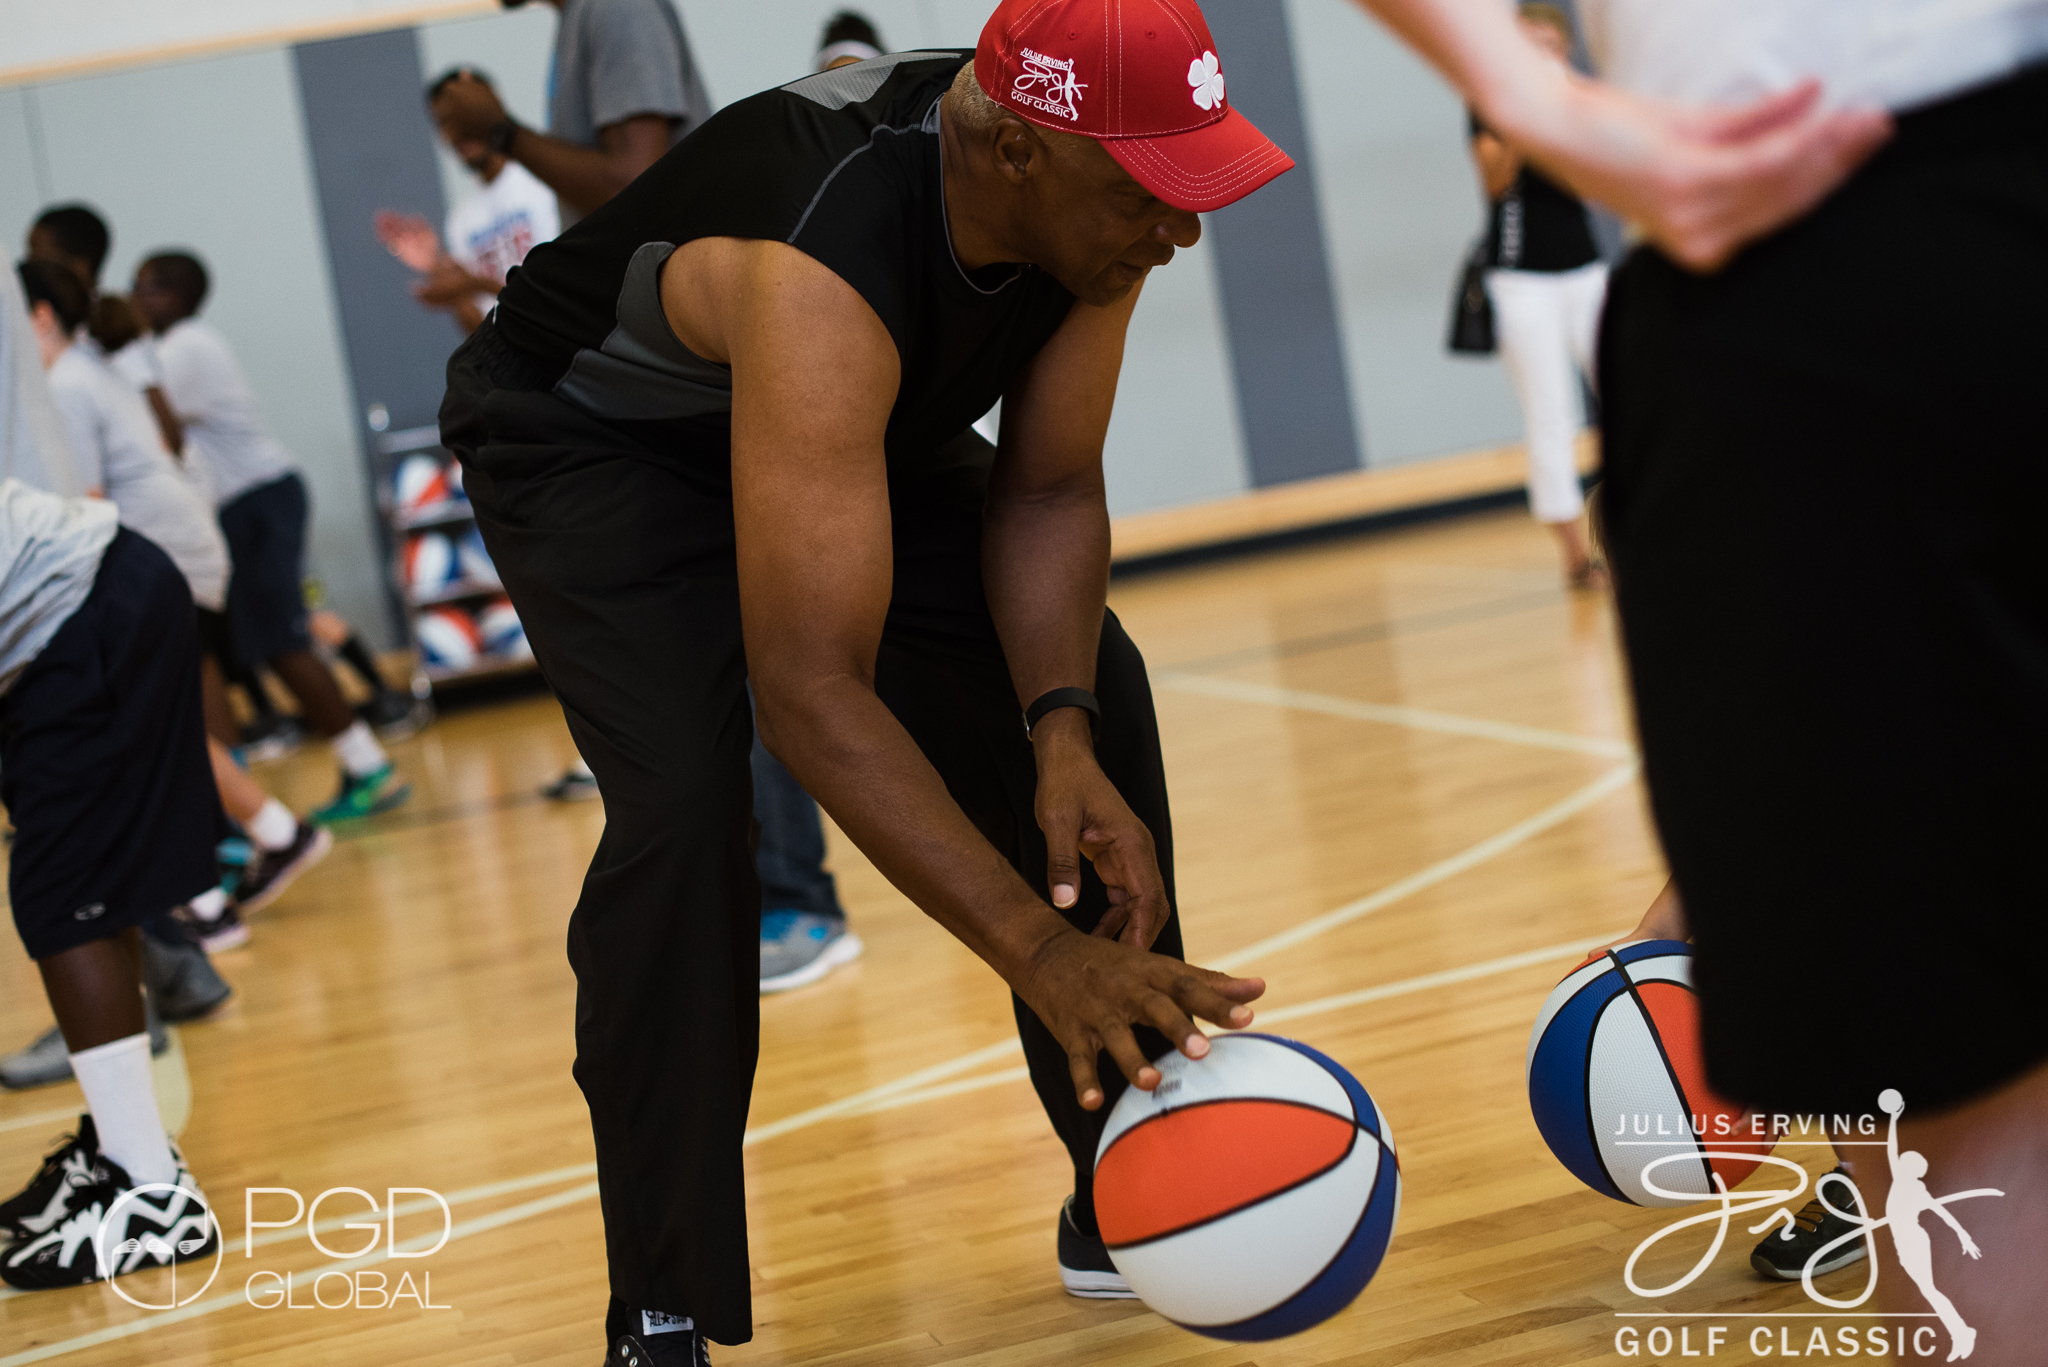 Dr. J dribbles the ABA style balls that were gifted to youth participants by Grab A Ball & Play Foundation